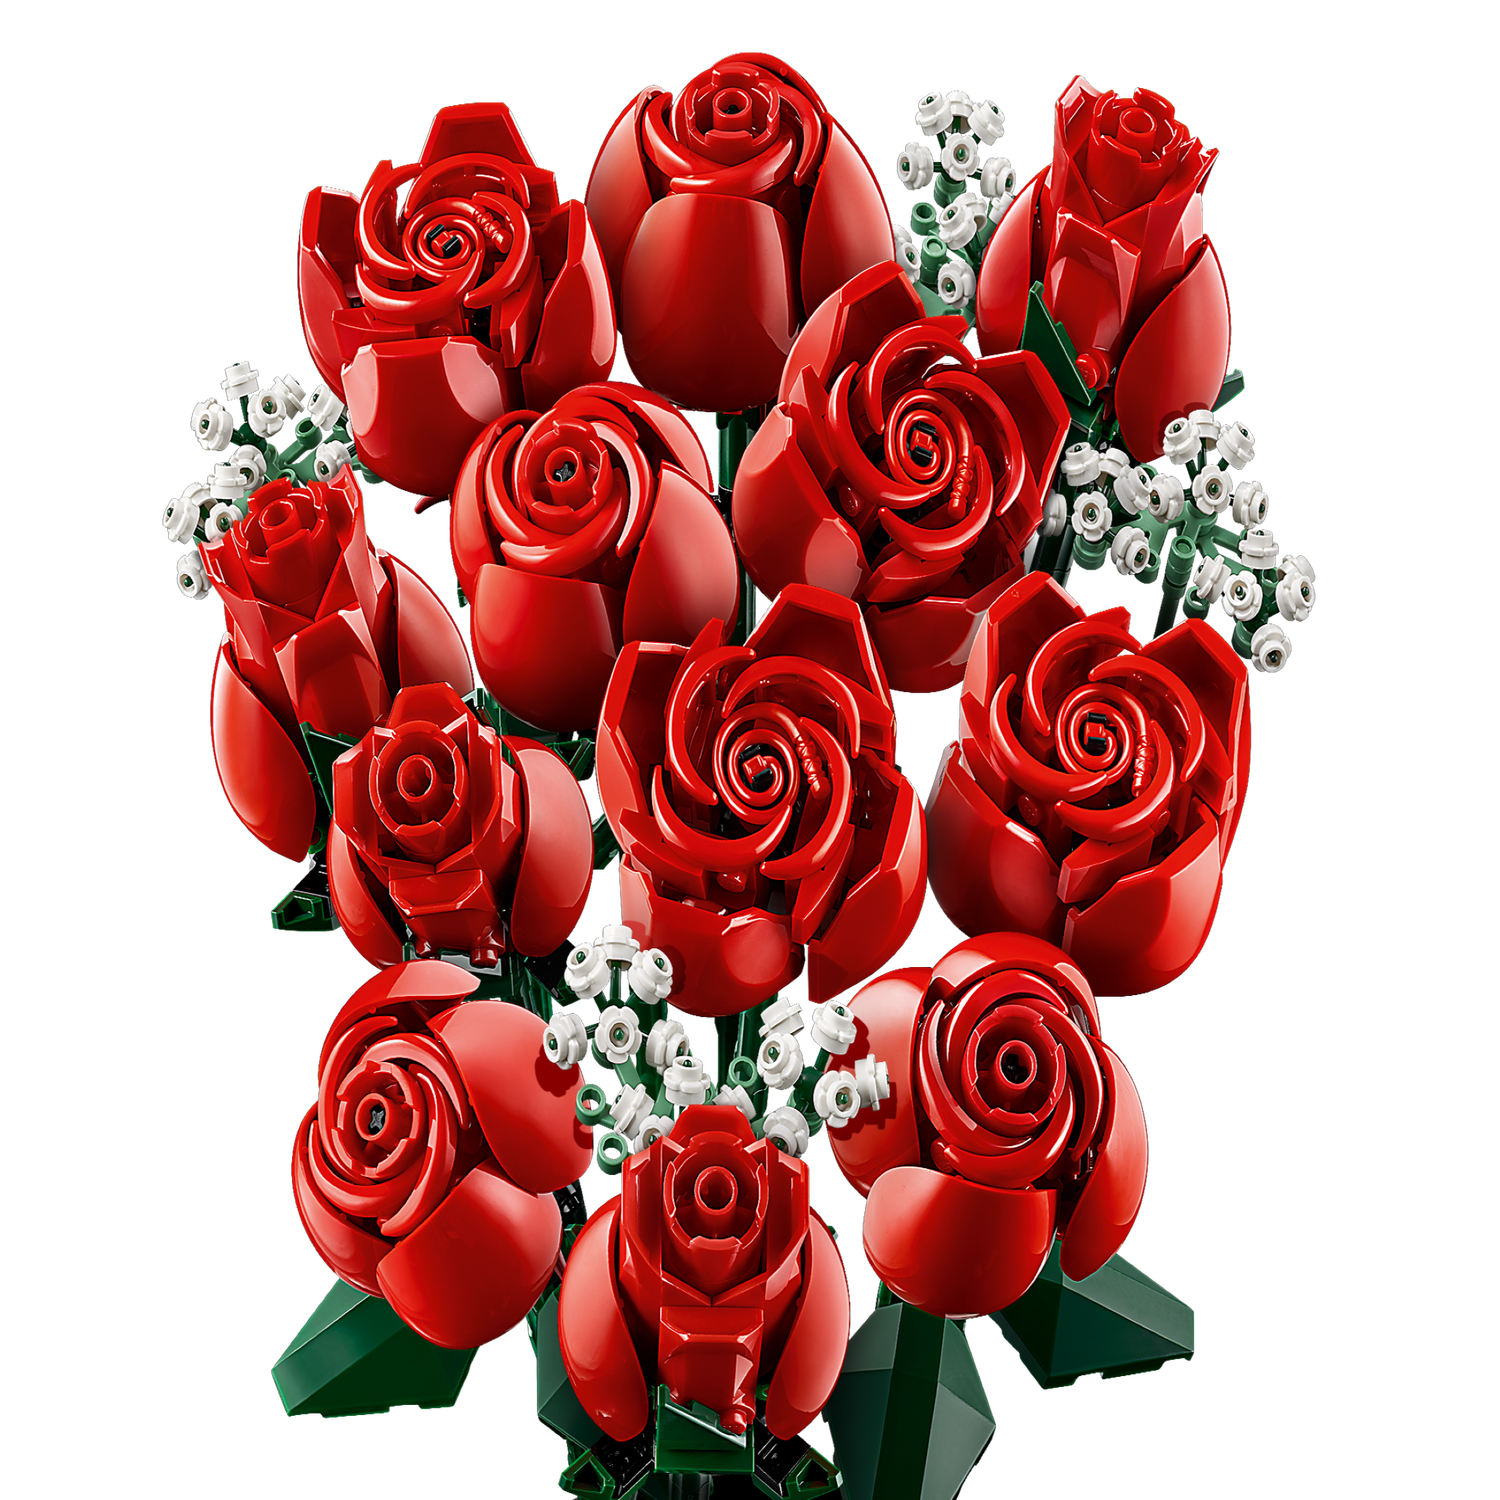 Bouquet of Roses 10328 | The Botanical Collection | Buy online at the ...